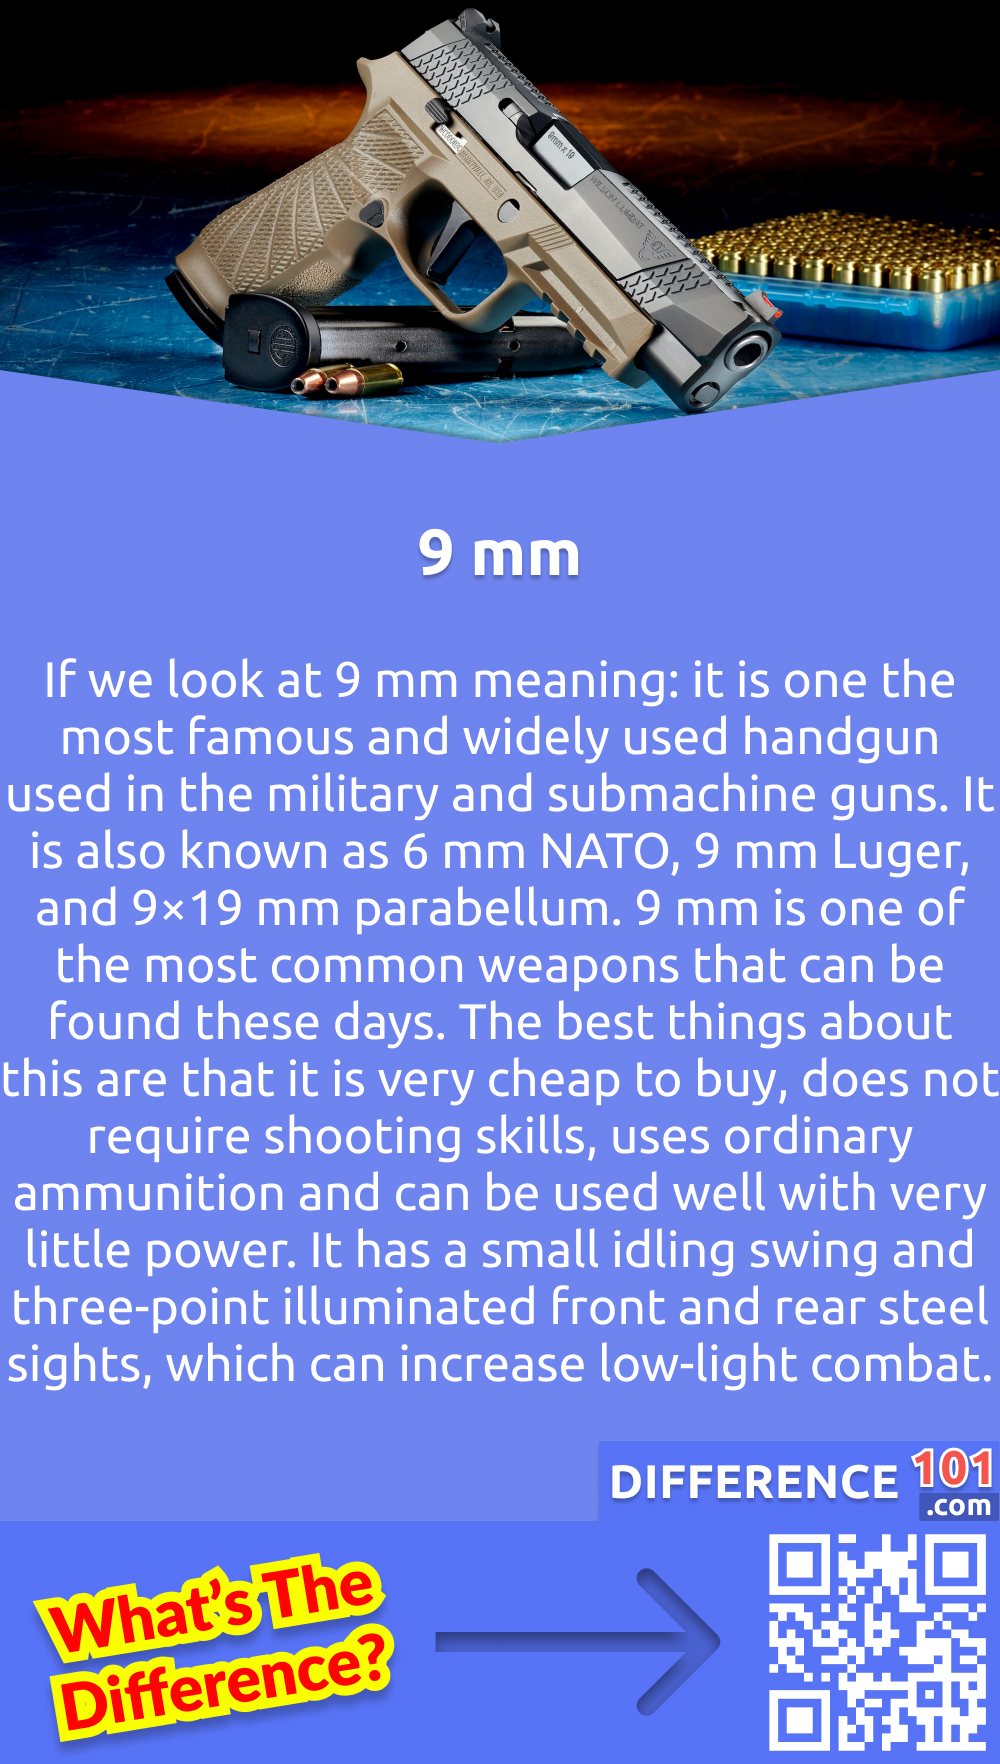 What Is 9 mm? If we look at 9 mm meaning: it is one the most famous and widely used handgun used in the military and submachine guns. It is also known as 6 mm NATO, 9 mm Luger, and 9×19 mm parabellum. 9 mm is one of the most common weapons that can be found these days. The best things about this are that it is very cheap to buy, does not require shooting skills, uses ordinary ammunition and can be used well with very little power. It has a small idling swing and three-point illuminated front and rear steel sights, which can increase low-light combat. It can also be upgraded to a longer magazine and longer scope to increase its performance. 9 mm is also on the list of an advanced bulletproof gun as it can be hidden with the stealth skill of more than 50. The 9 mm cartridge was the first design to possess a stopping power of up to 50 meters, but it is still effective at longer distances. It has a moderate recoil which is combined with a flat trajectory.